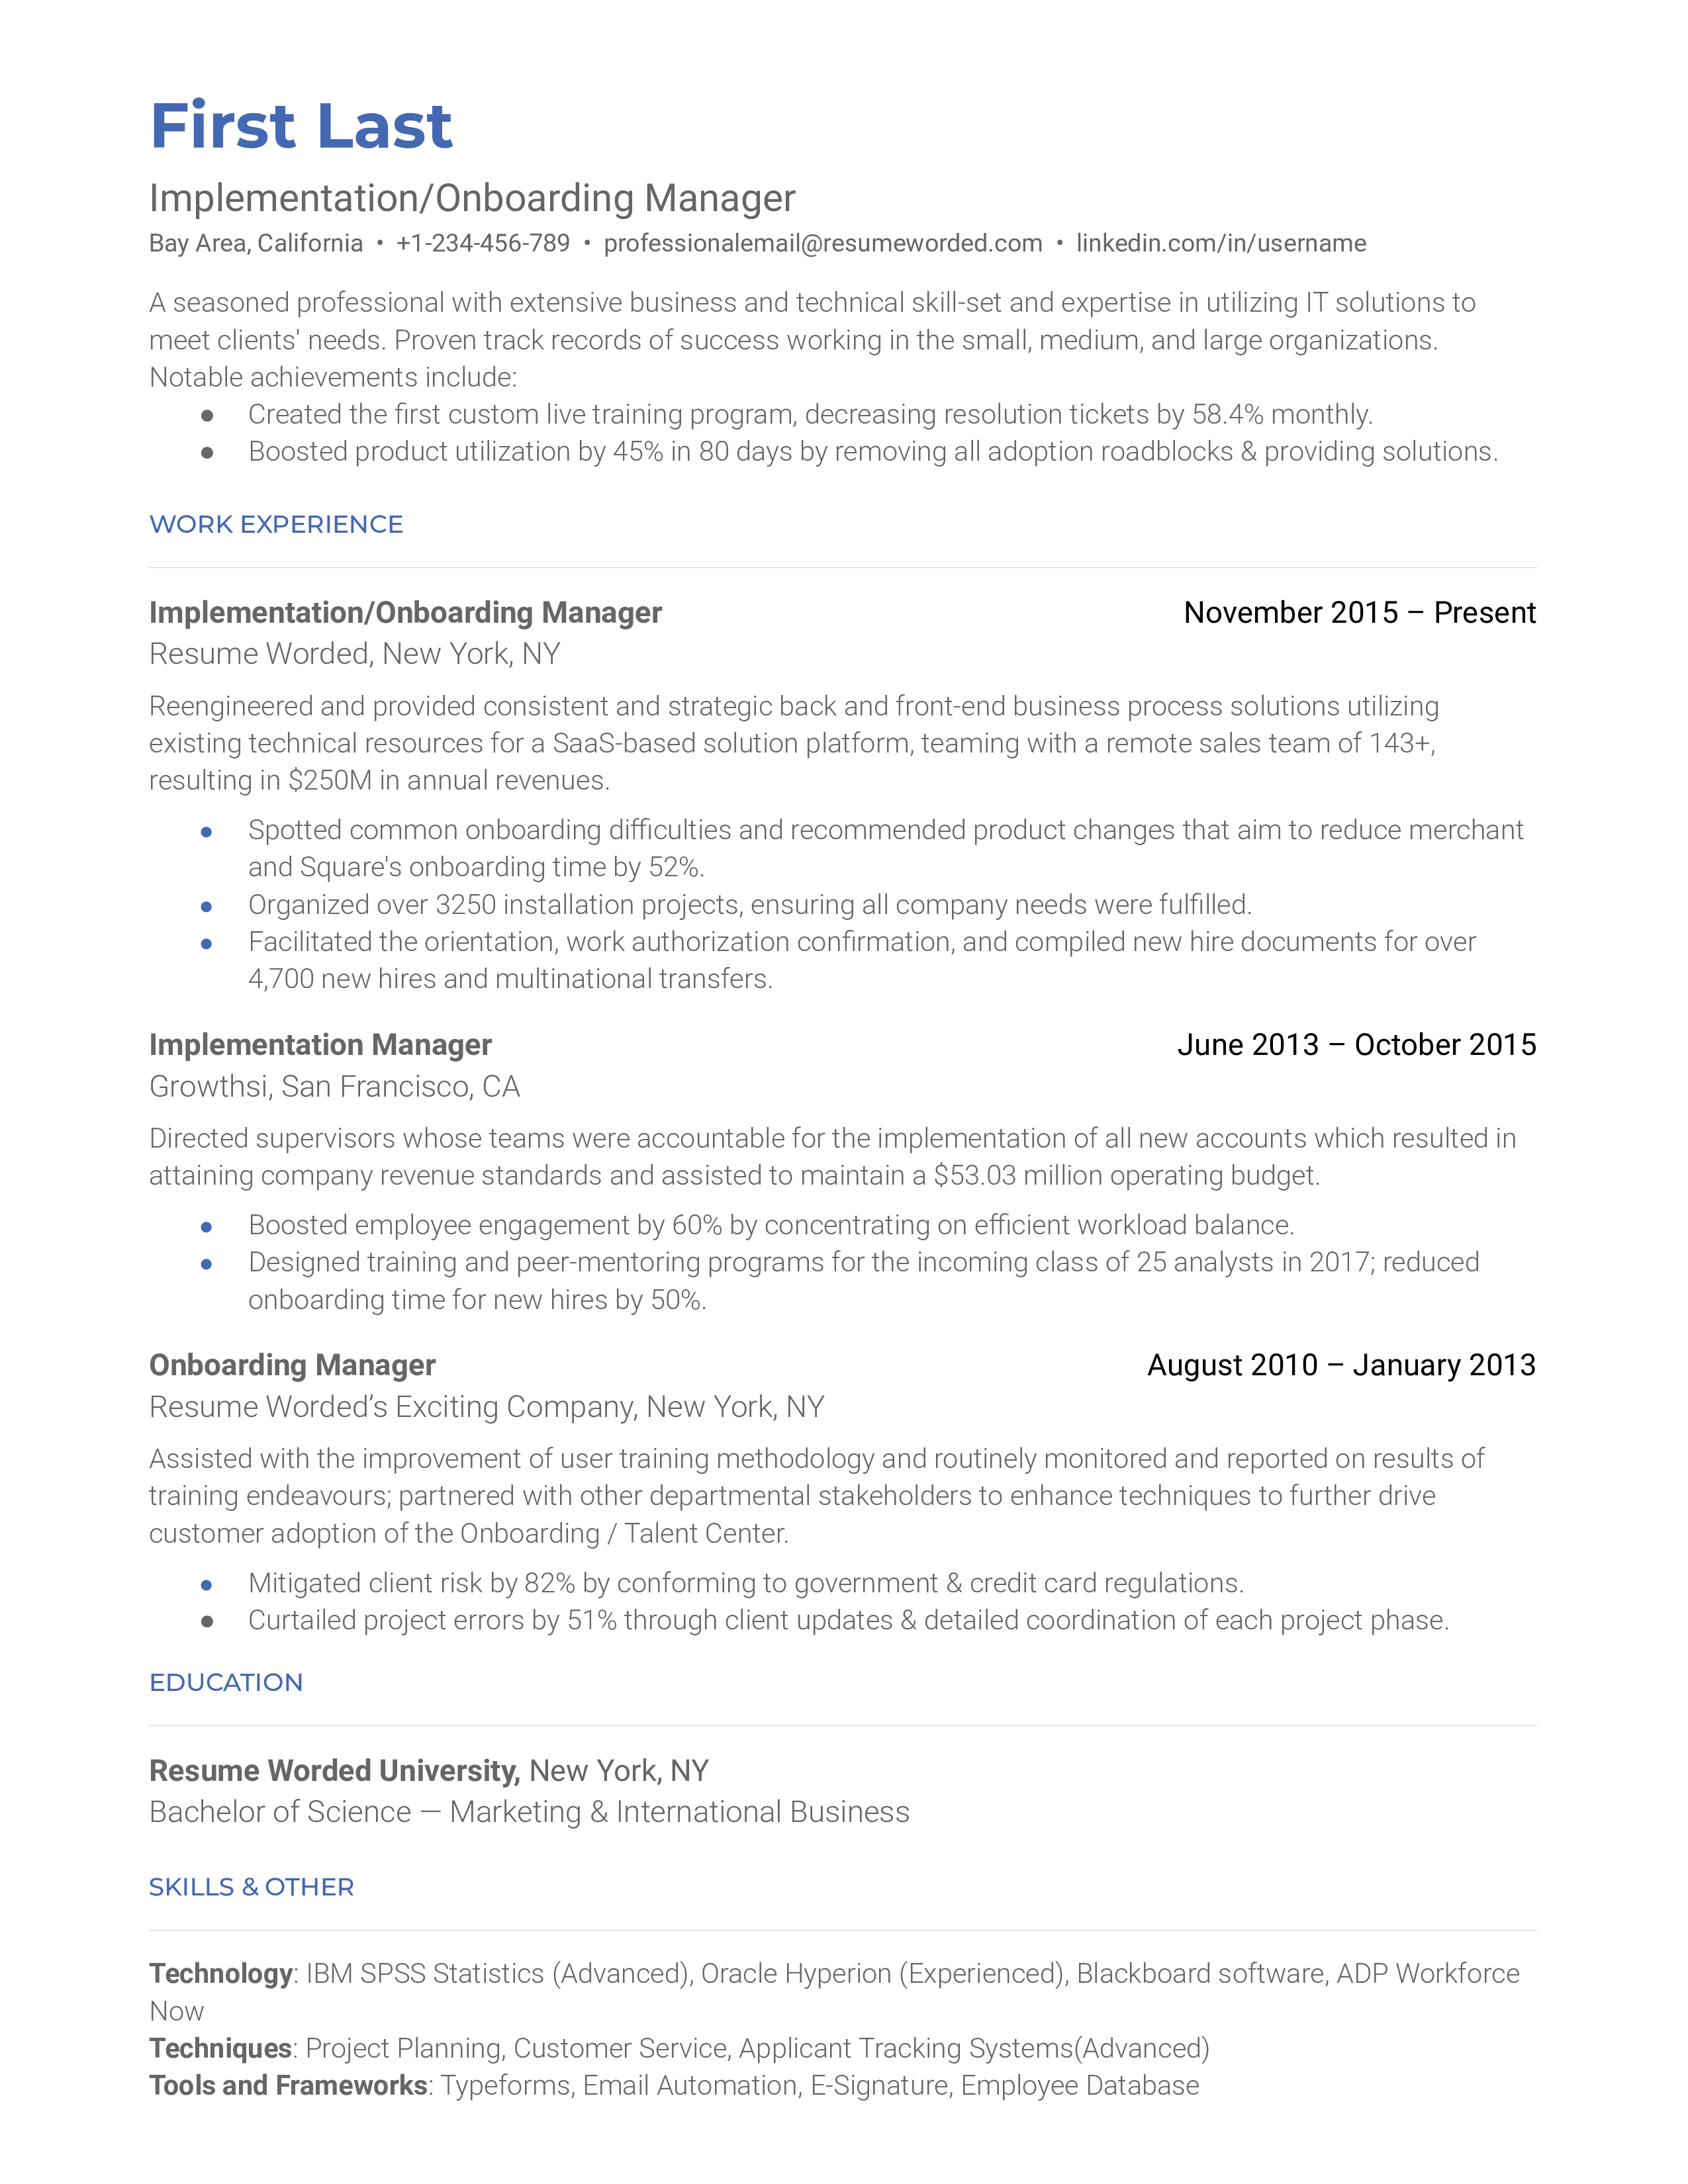 Implementation/Onboarding Manager Resume Template + Example